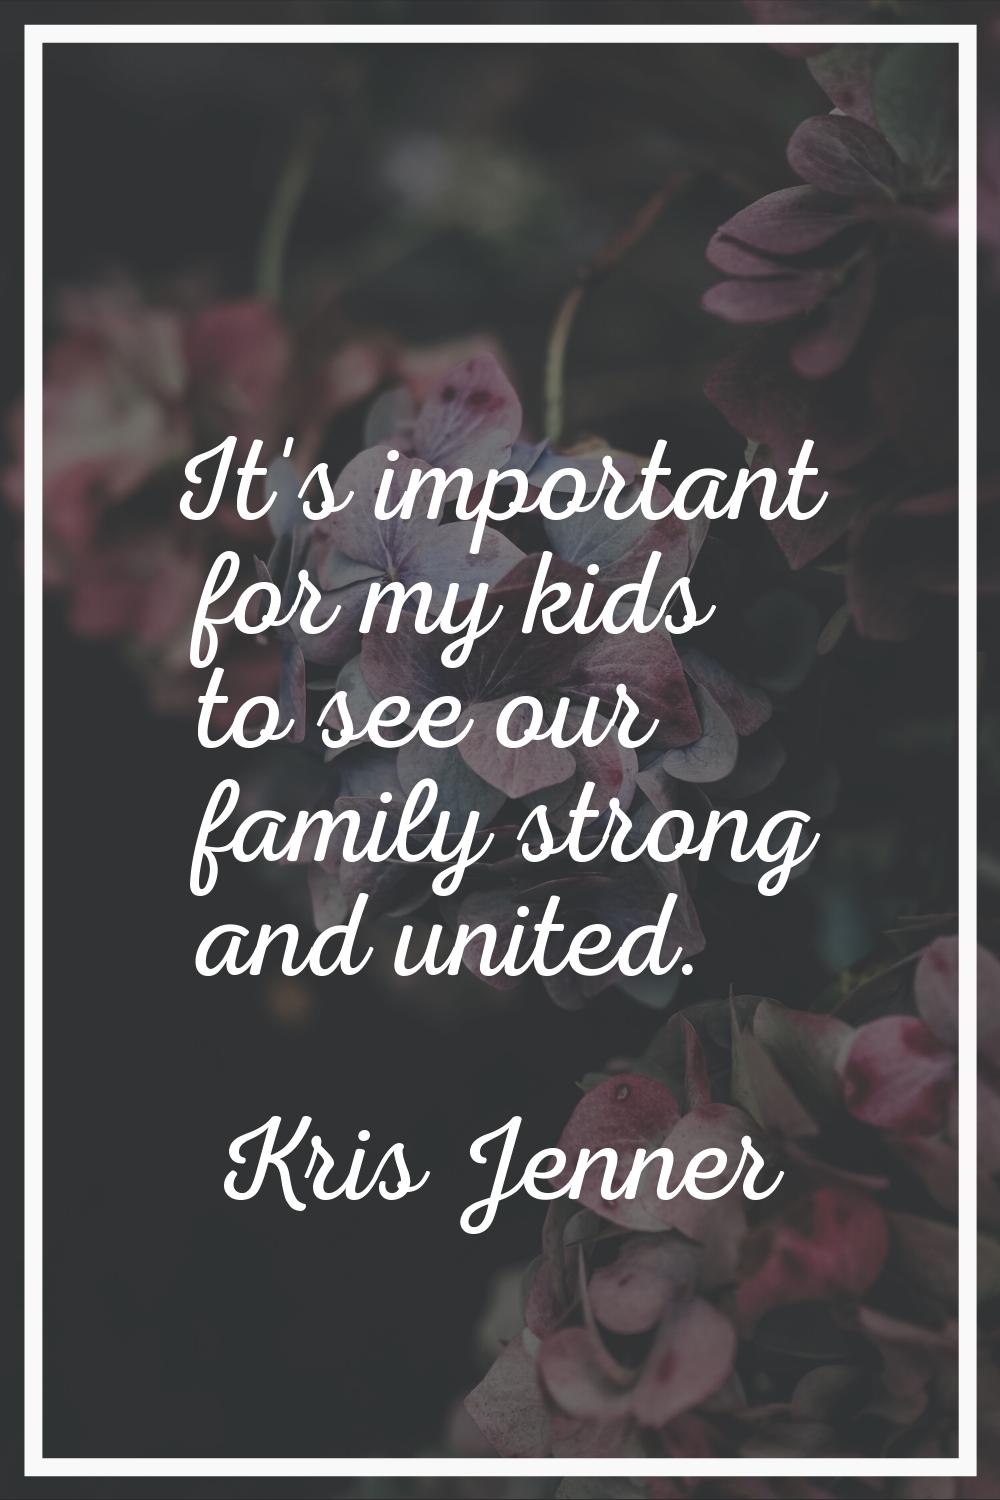 It's important for my kids to see our family strong and united.